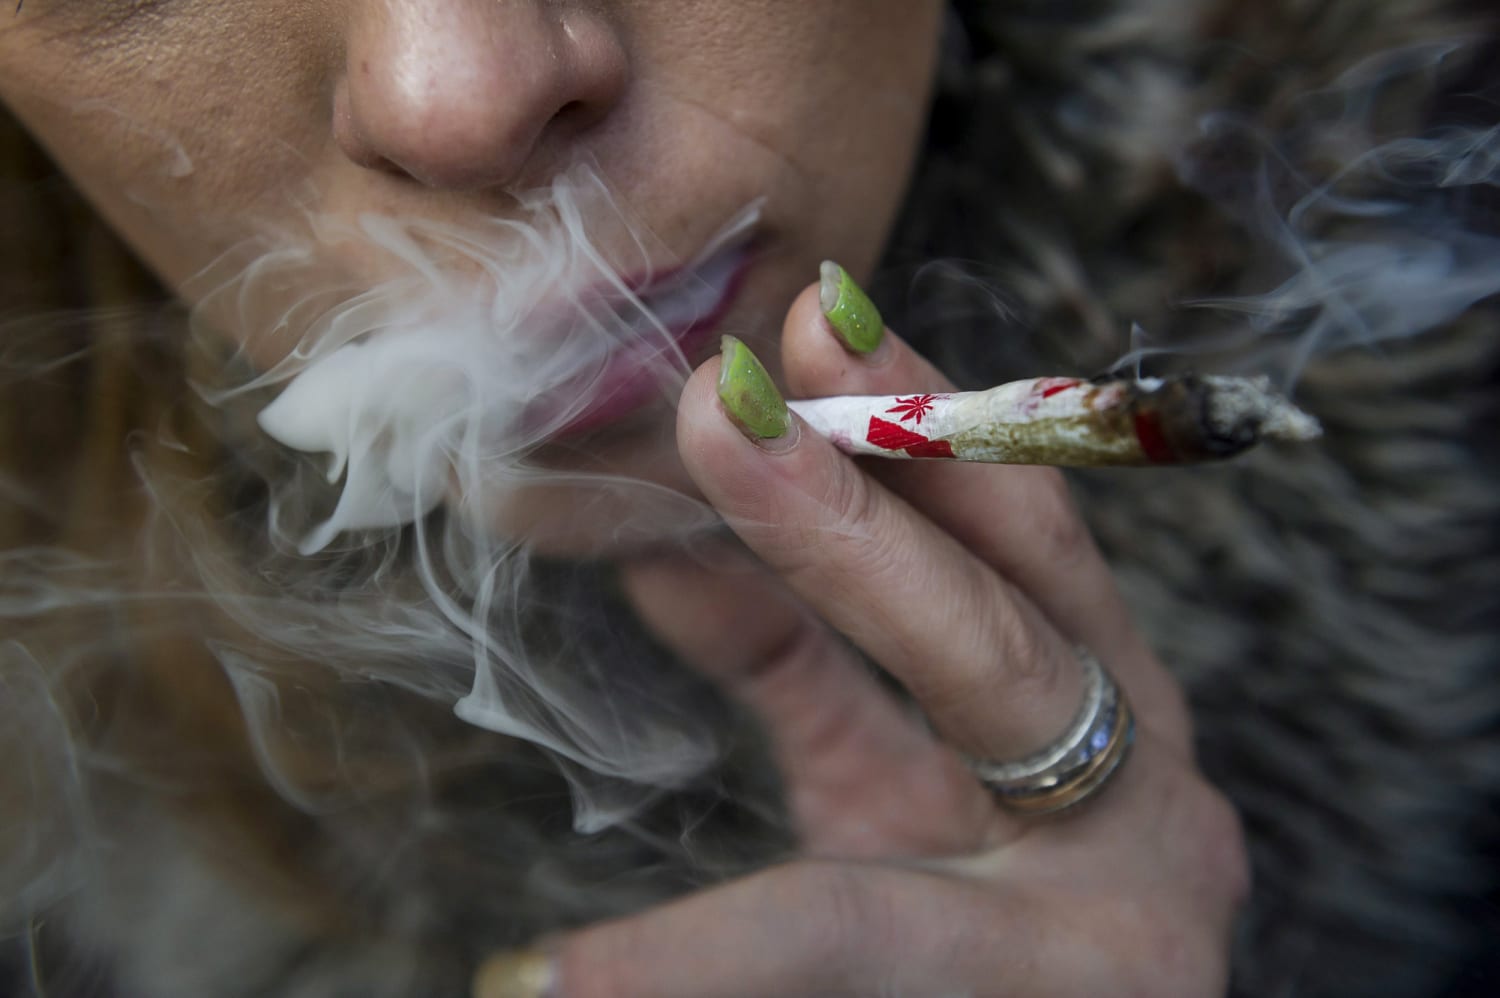 New drug for marijuana addiction shows promise, small study finds